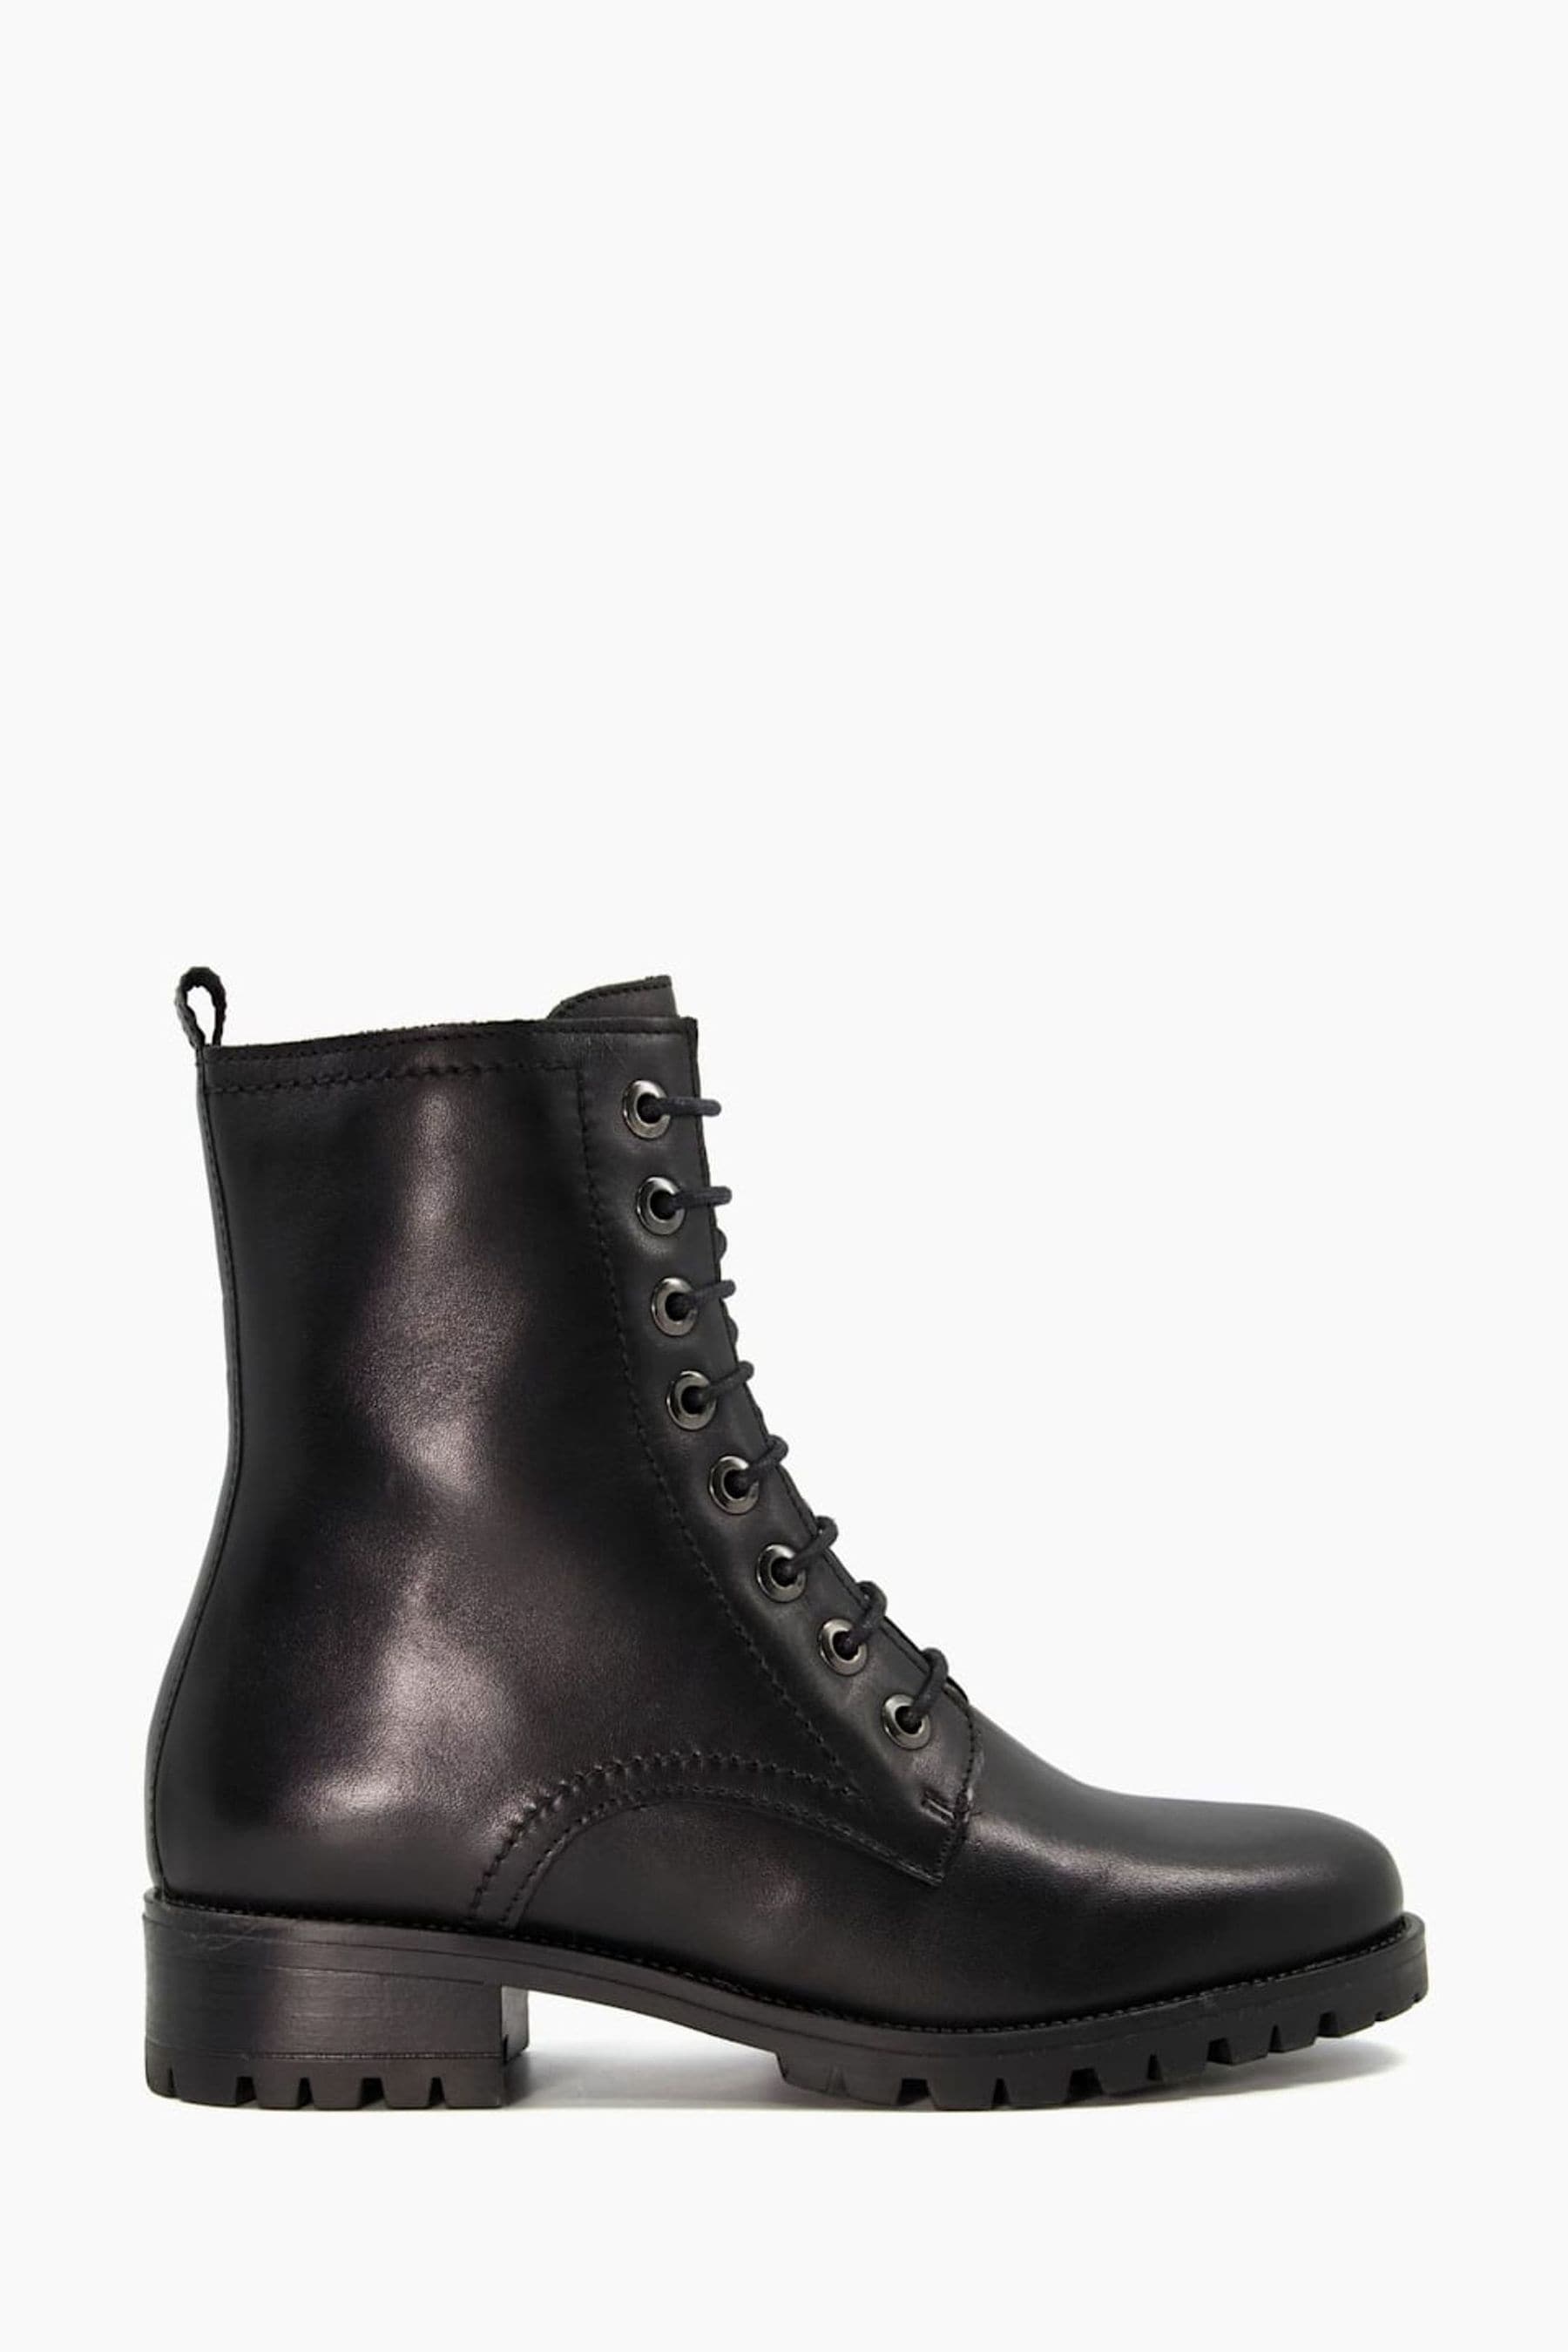 Buy Dune London Prestone Cleated Sole Lace-Up Hiker Boots from the Next ...